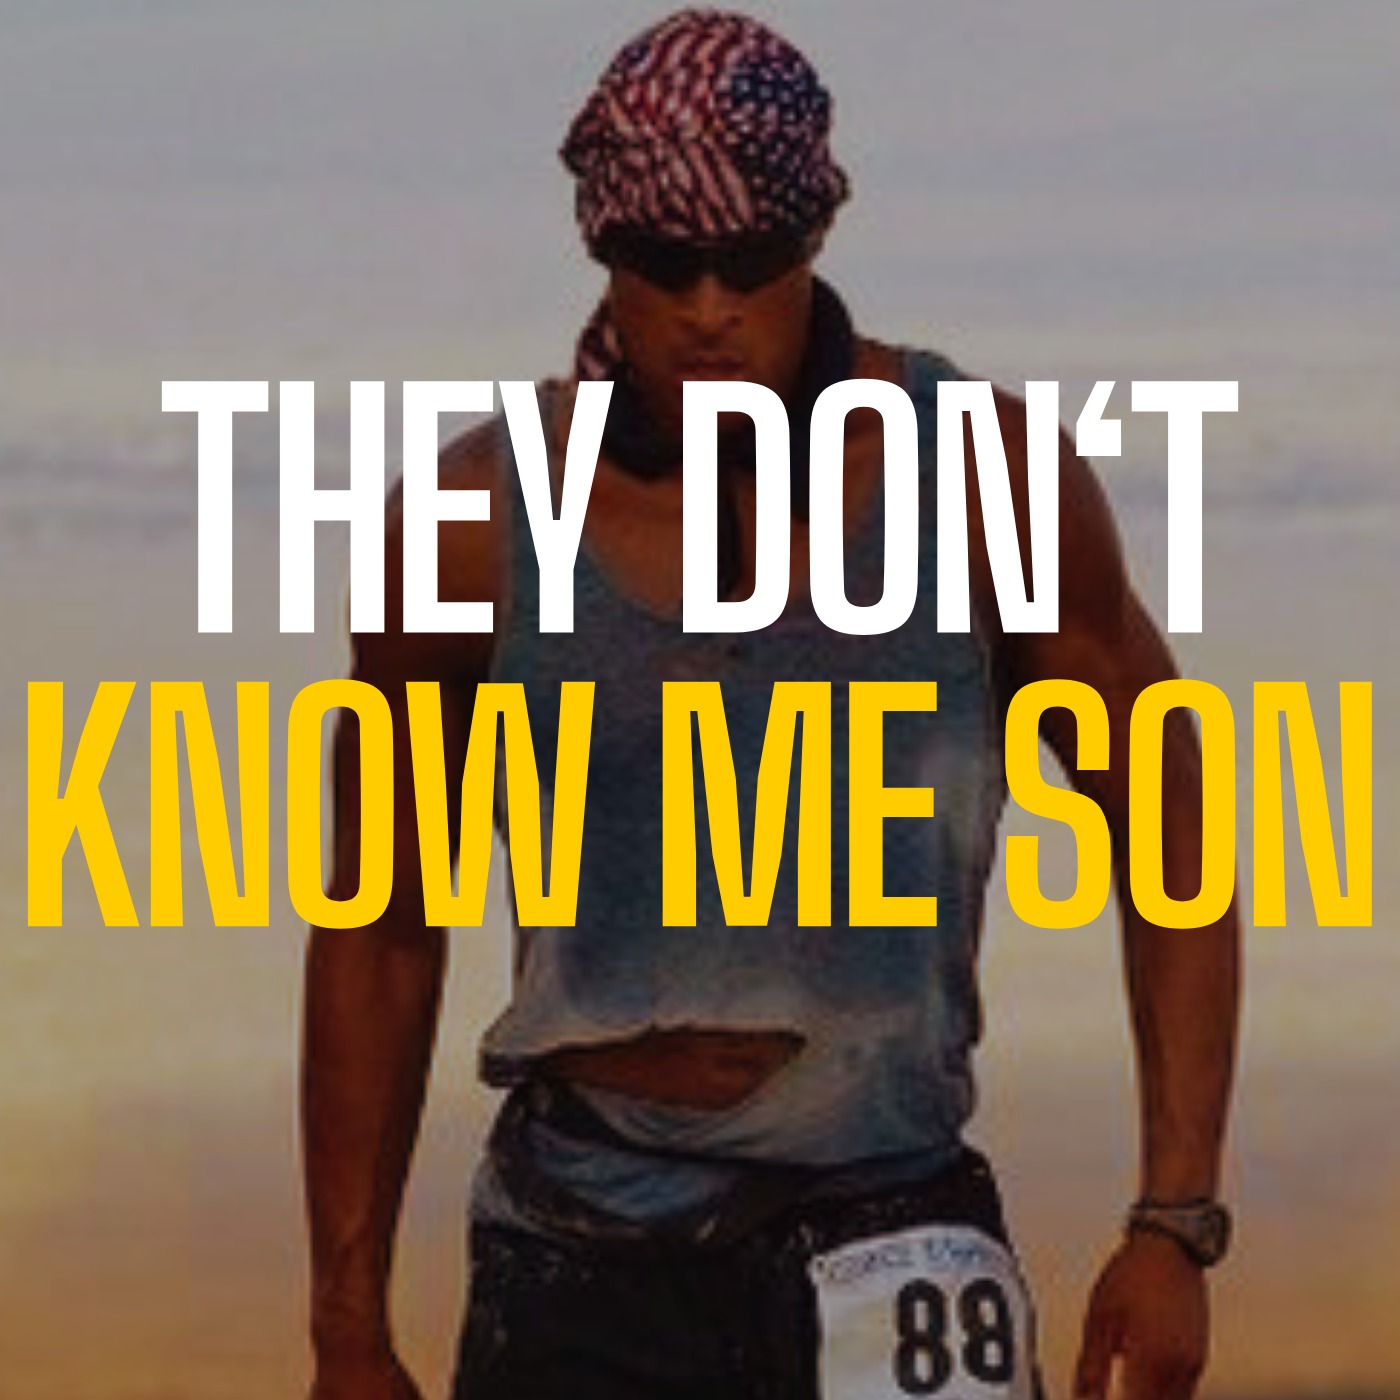 THEY DON‘T KNOW ME SON - David Goggins Motivational Speech